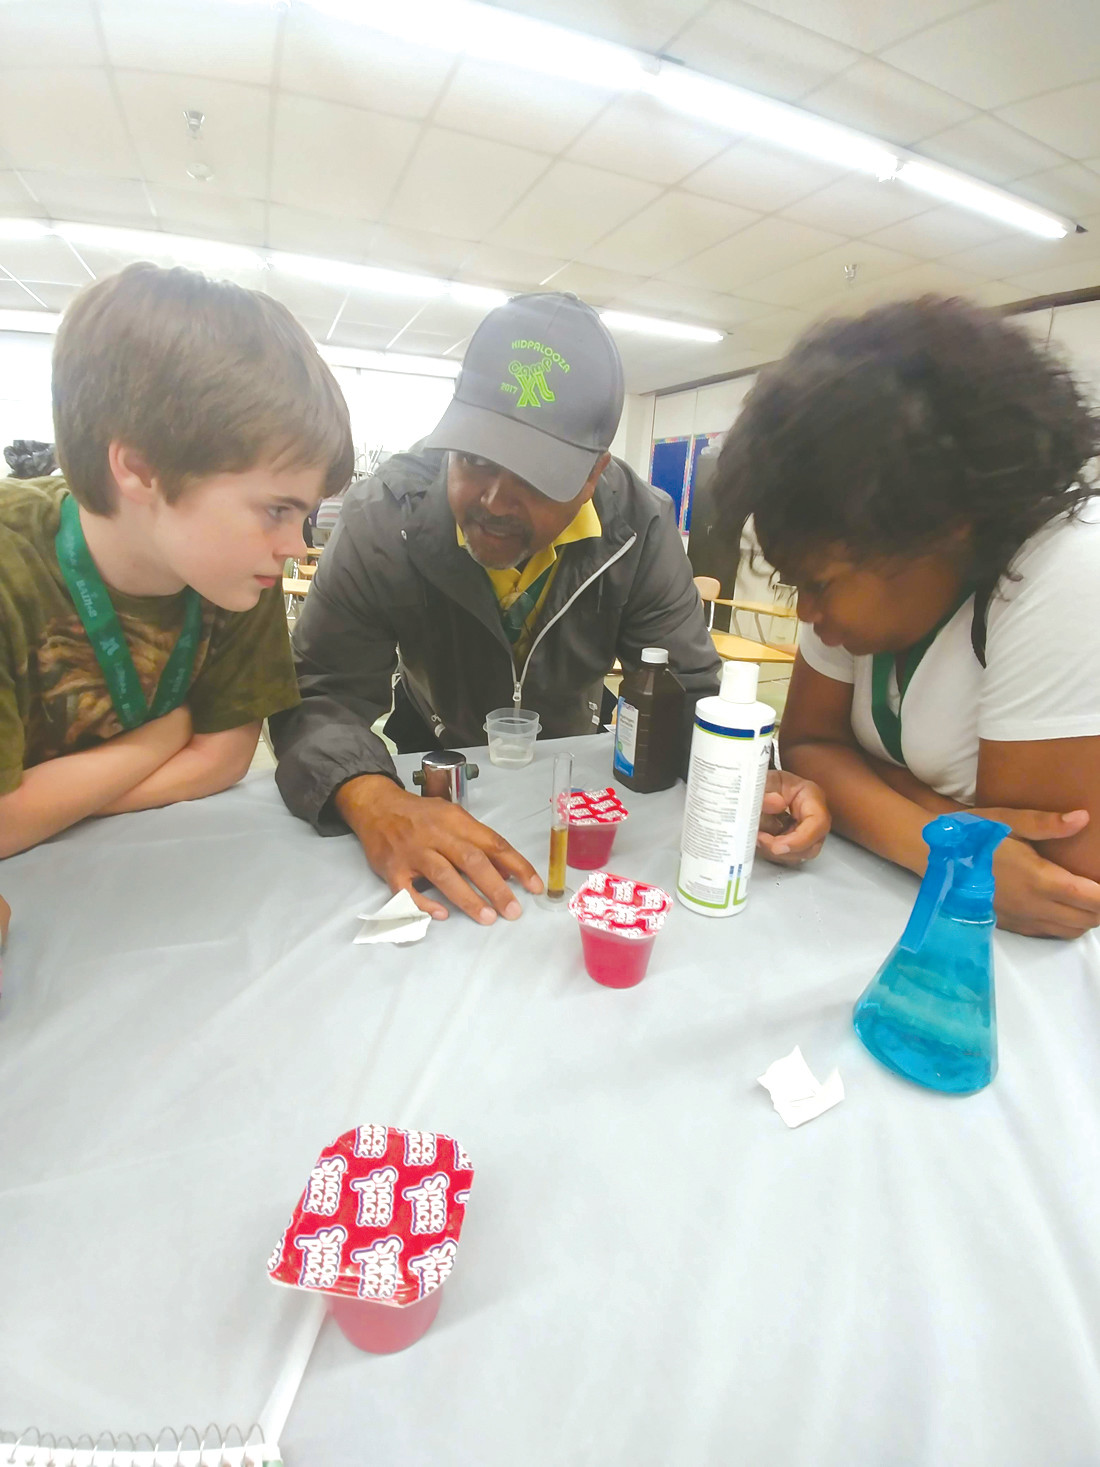 WILL IT WORK: Dr. Jesse Jordan and two of his students, Nyleiha McCants Snead and James Seal examine a solution being used in a jello experiment.